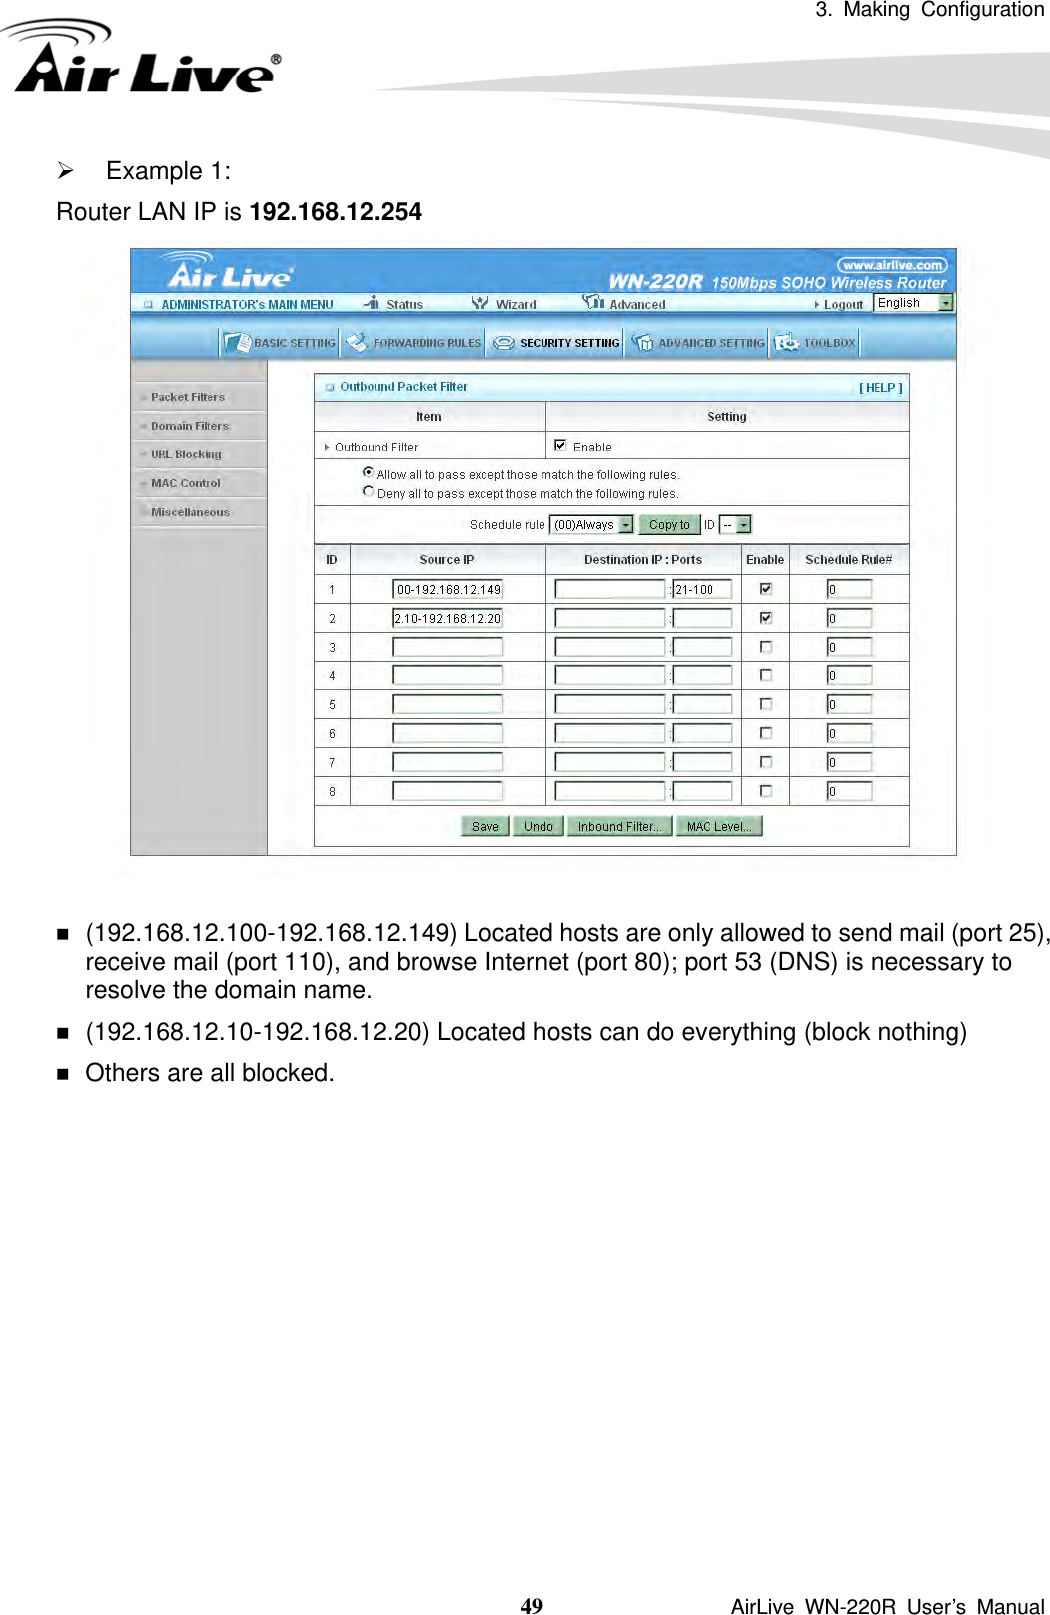 3. Making Configuration  49               AirLive WN-220R User’s Manual ¾ Example 1: Router LAN IP is 192.168.12.254    (192.168.12.100-192.168.12.149) Located hosts are only allowed to send mail (port 25), receive mail (port 110), and browse Internet (port 80); port 53 (DNS) is necessary to resolve the domain name.  (192.168.12.10-192.168.12.20) Located hosts can do everything (block nothing)    Others are all blocked. 